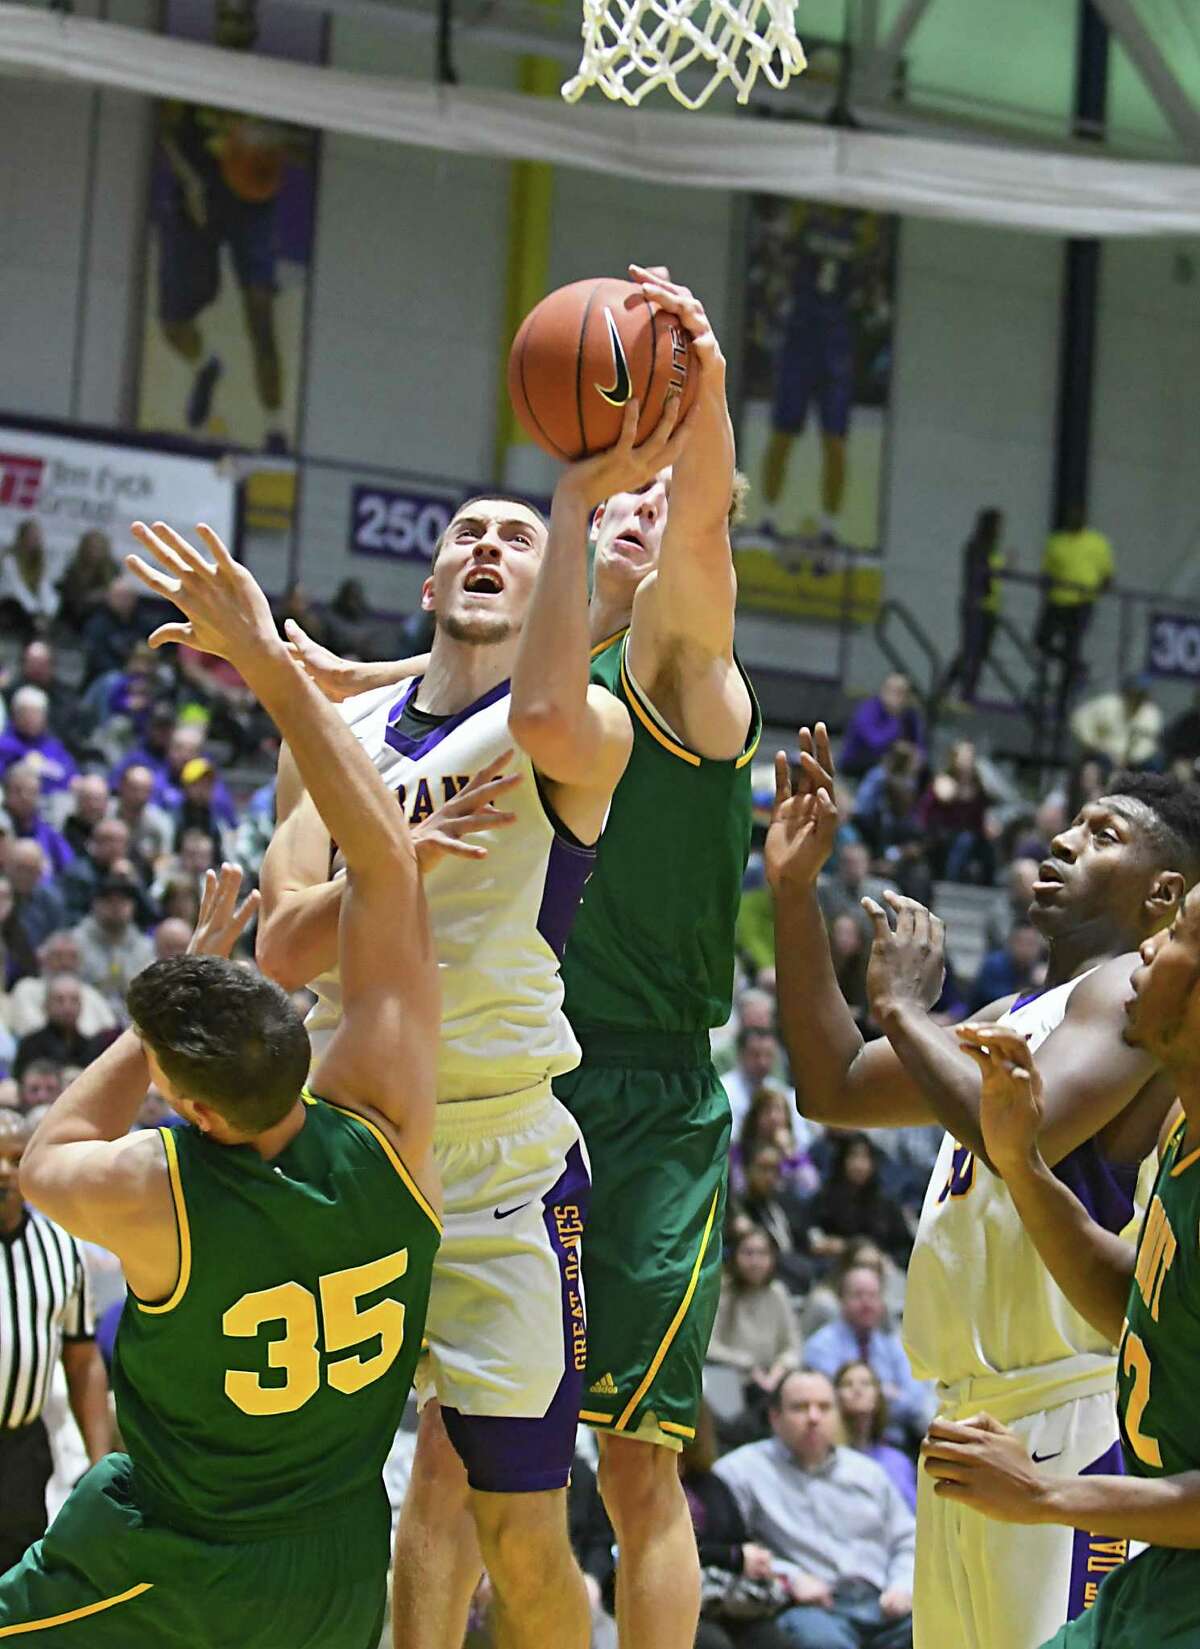 University at Albany's Joe Cremo drives to the basket during a basketball game against Vermont at the SEFCU Arena on Wednesday, Jan. 25, 2017 in Albany, N.Y. (Lori Van Buren / Times Union)